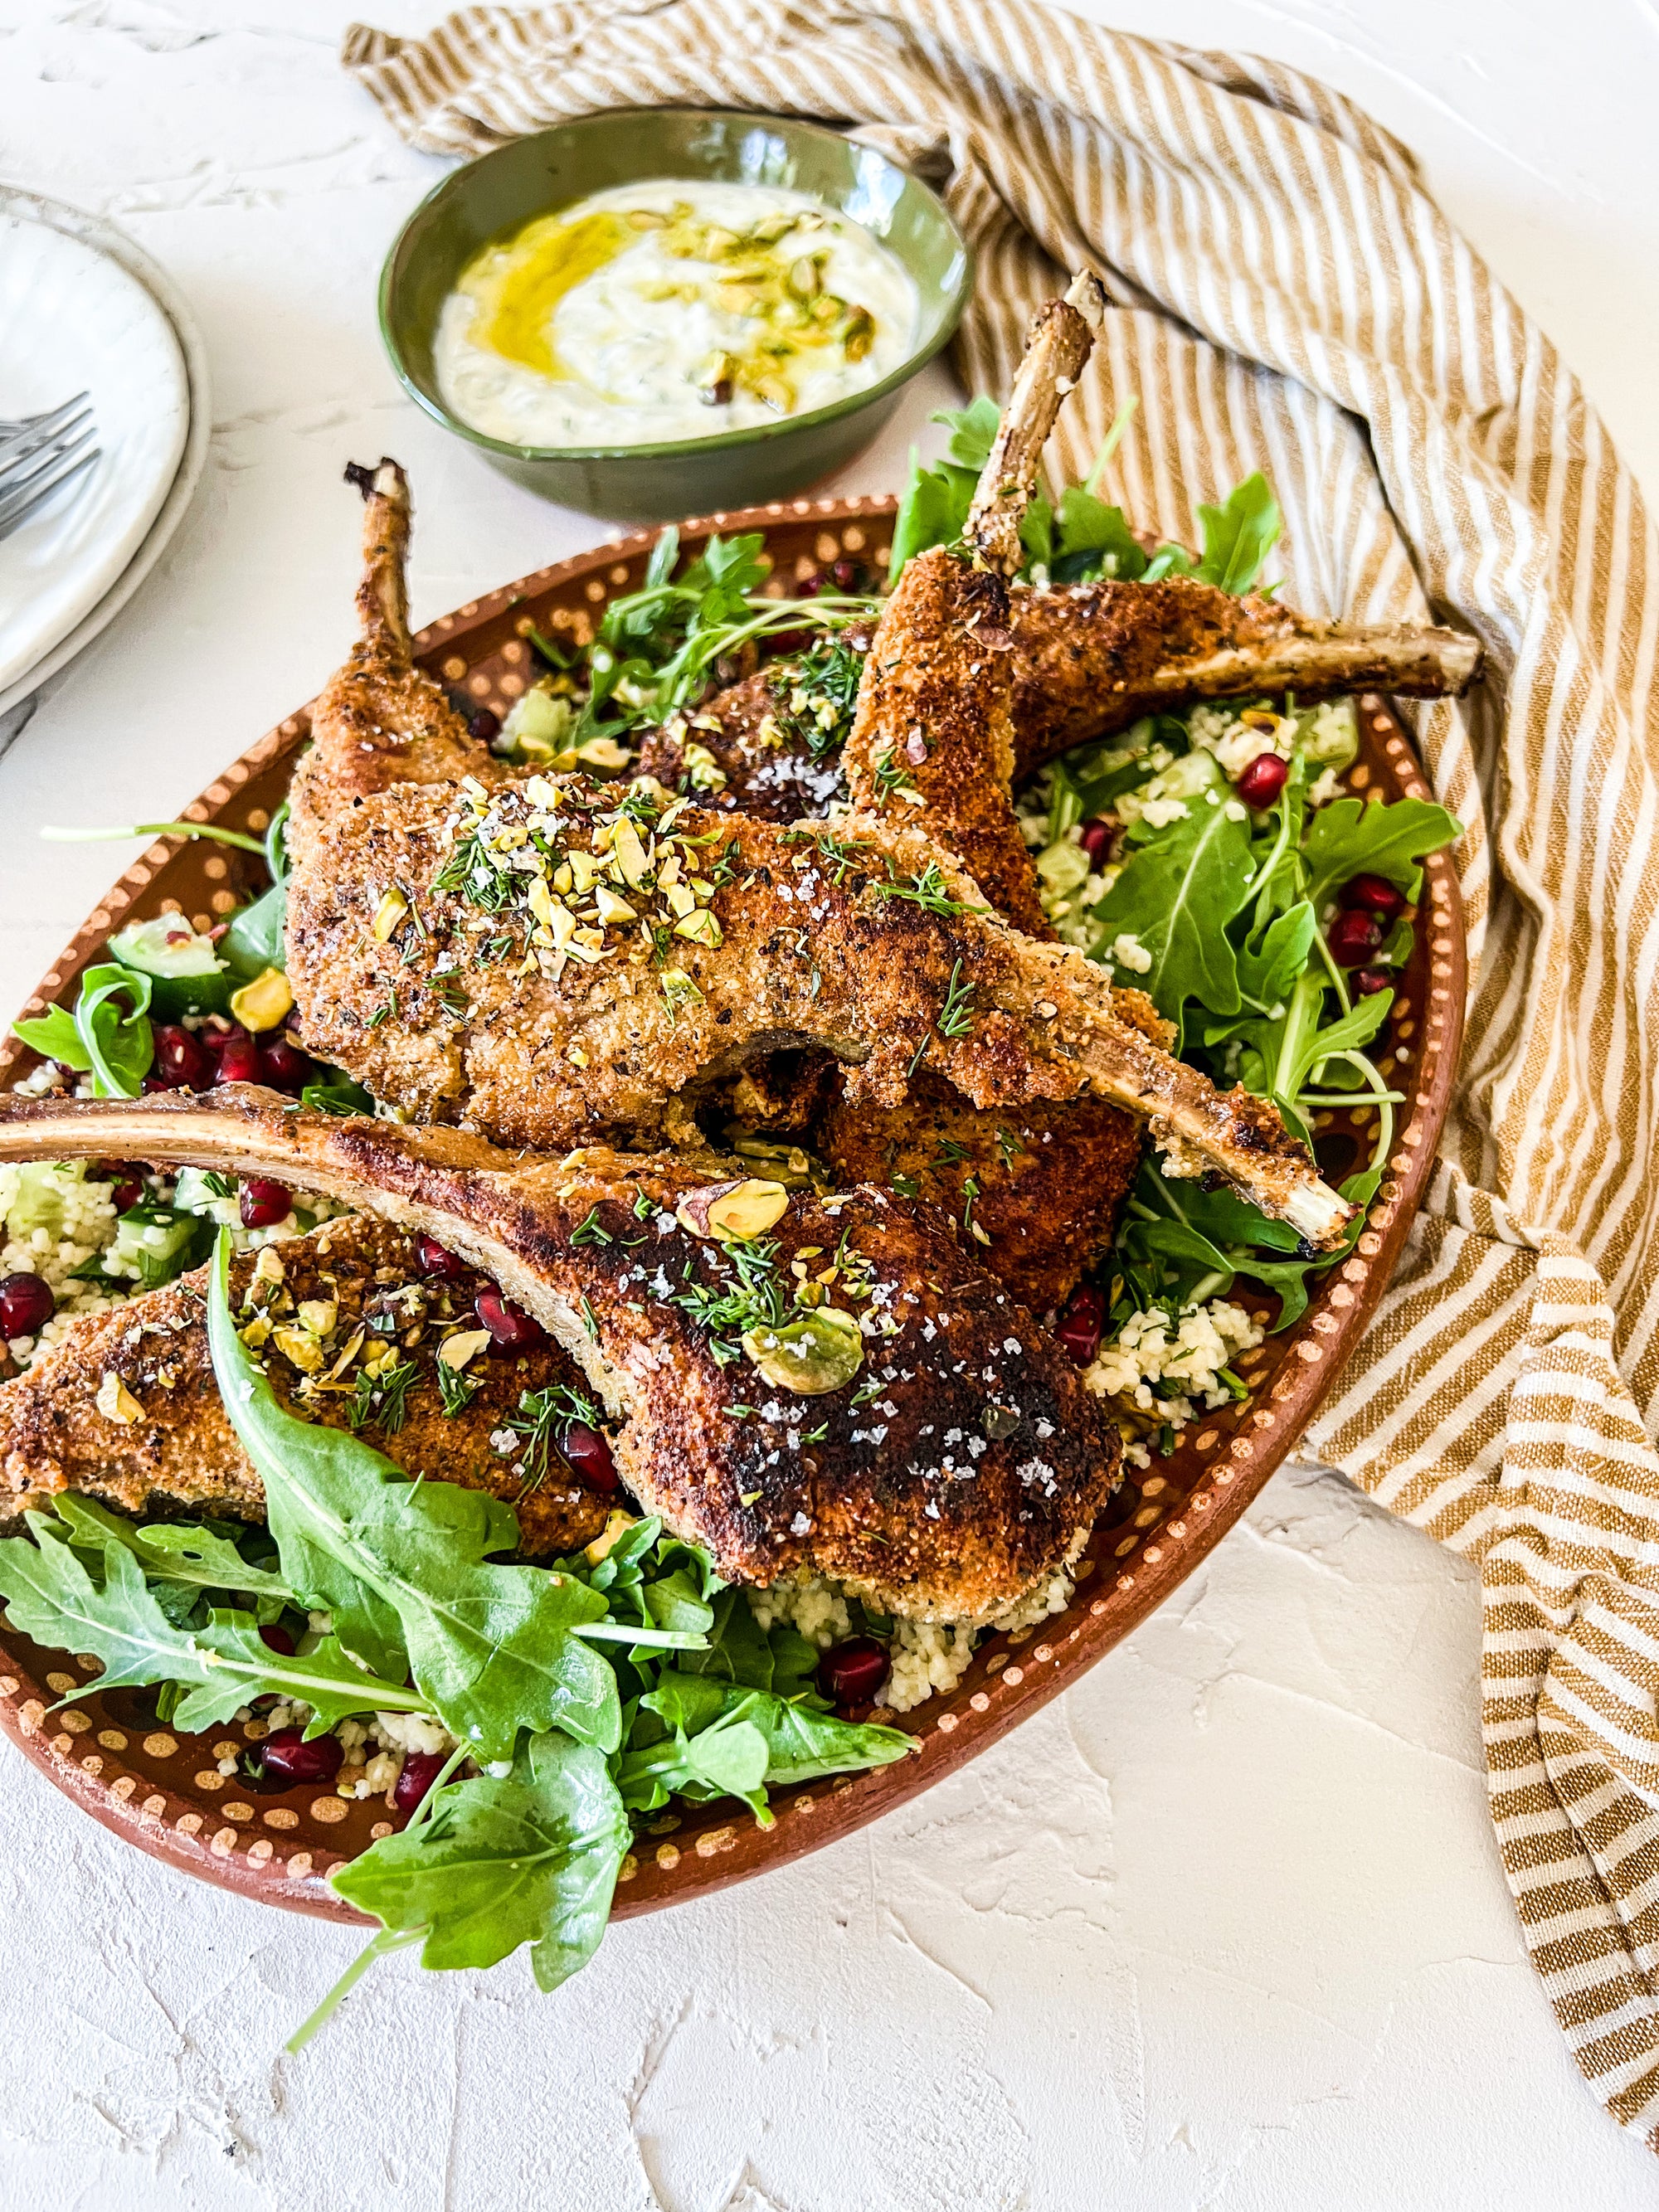 Almond crumbed lamb cutlets on herby couscous with mint and dill yoghurt dressing